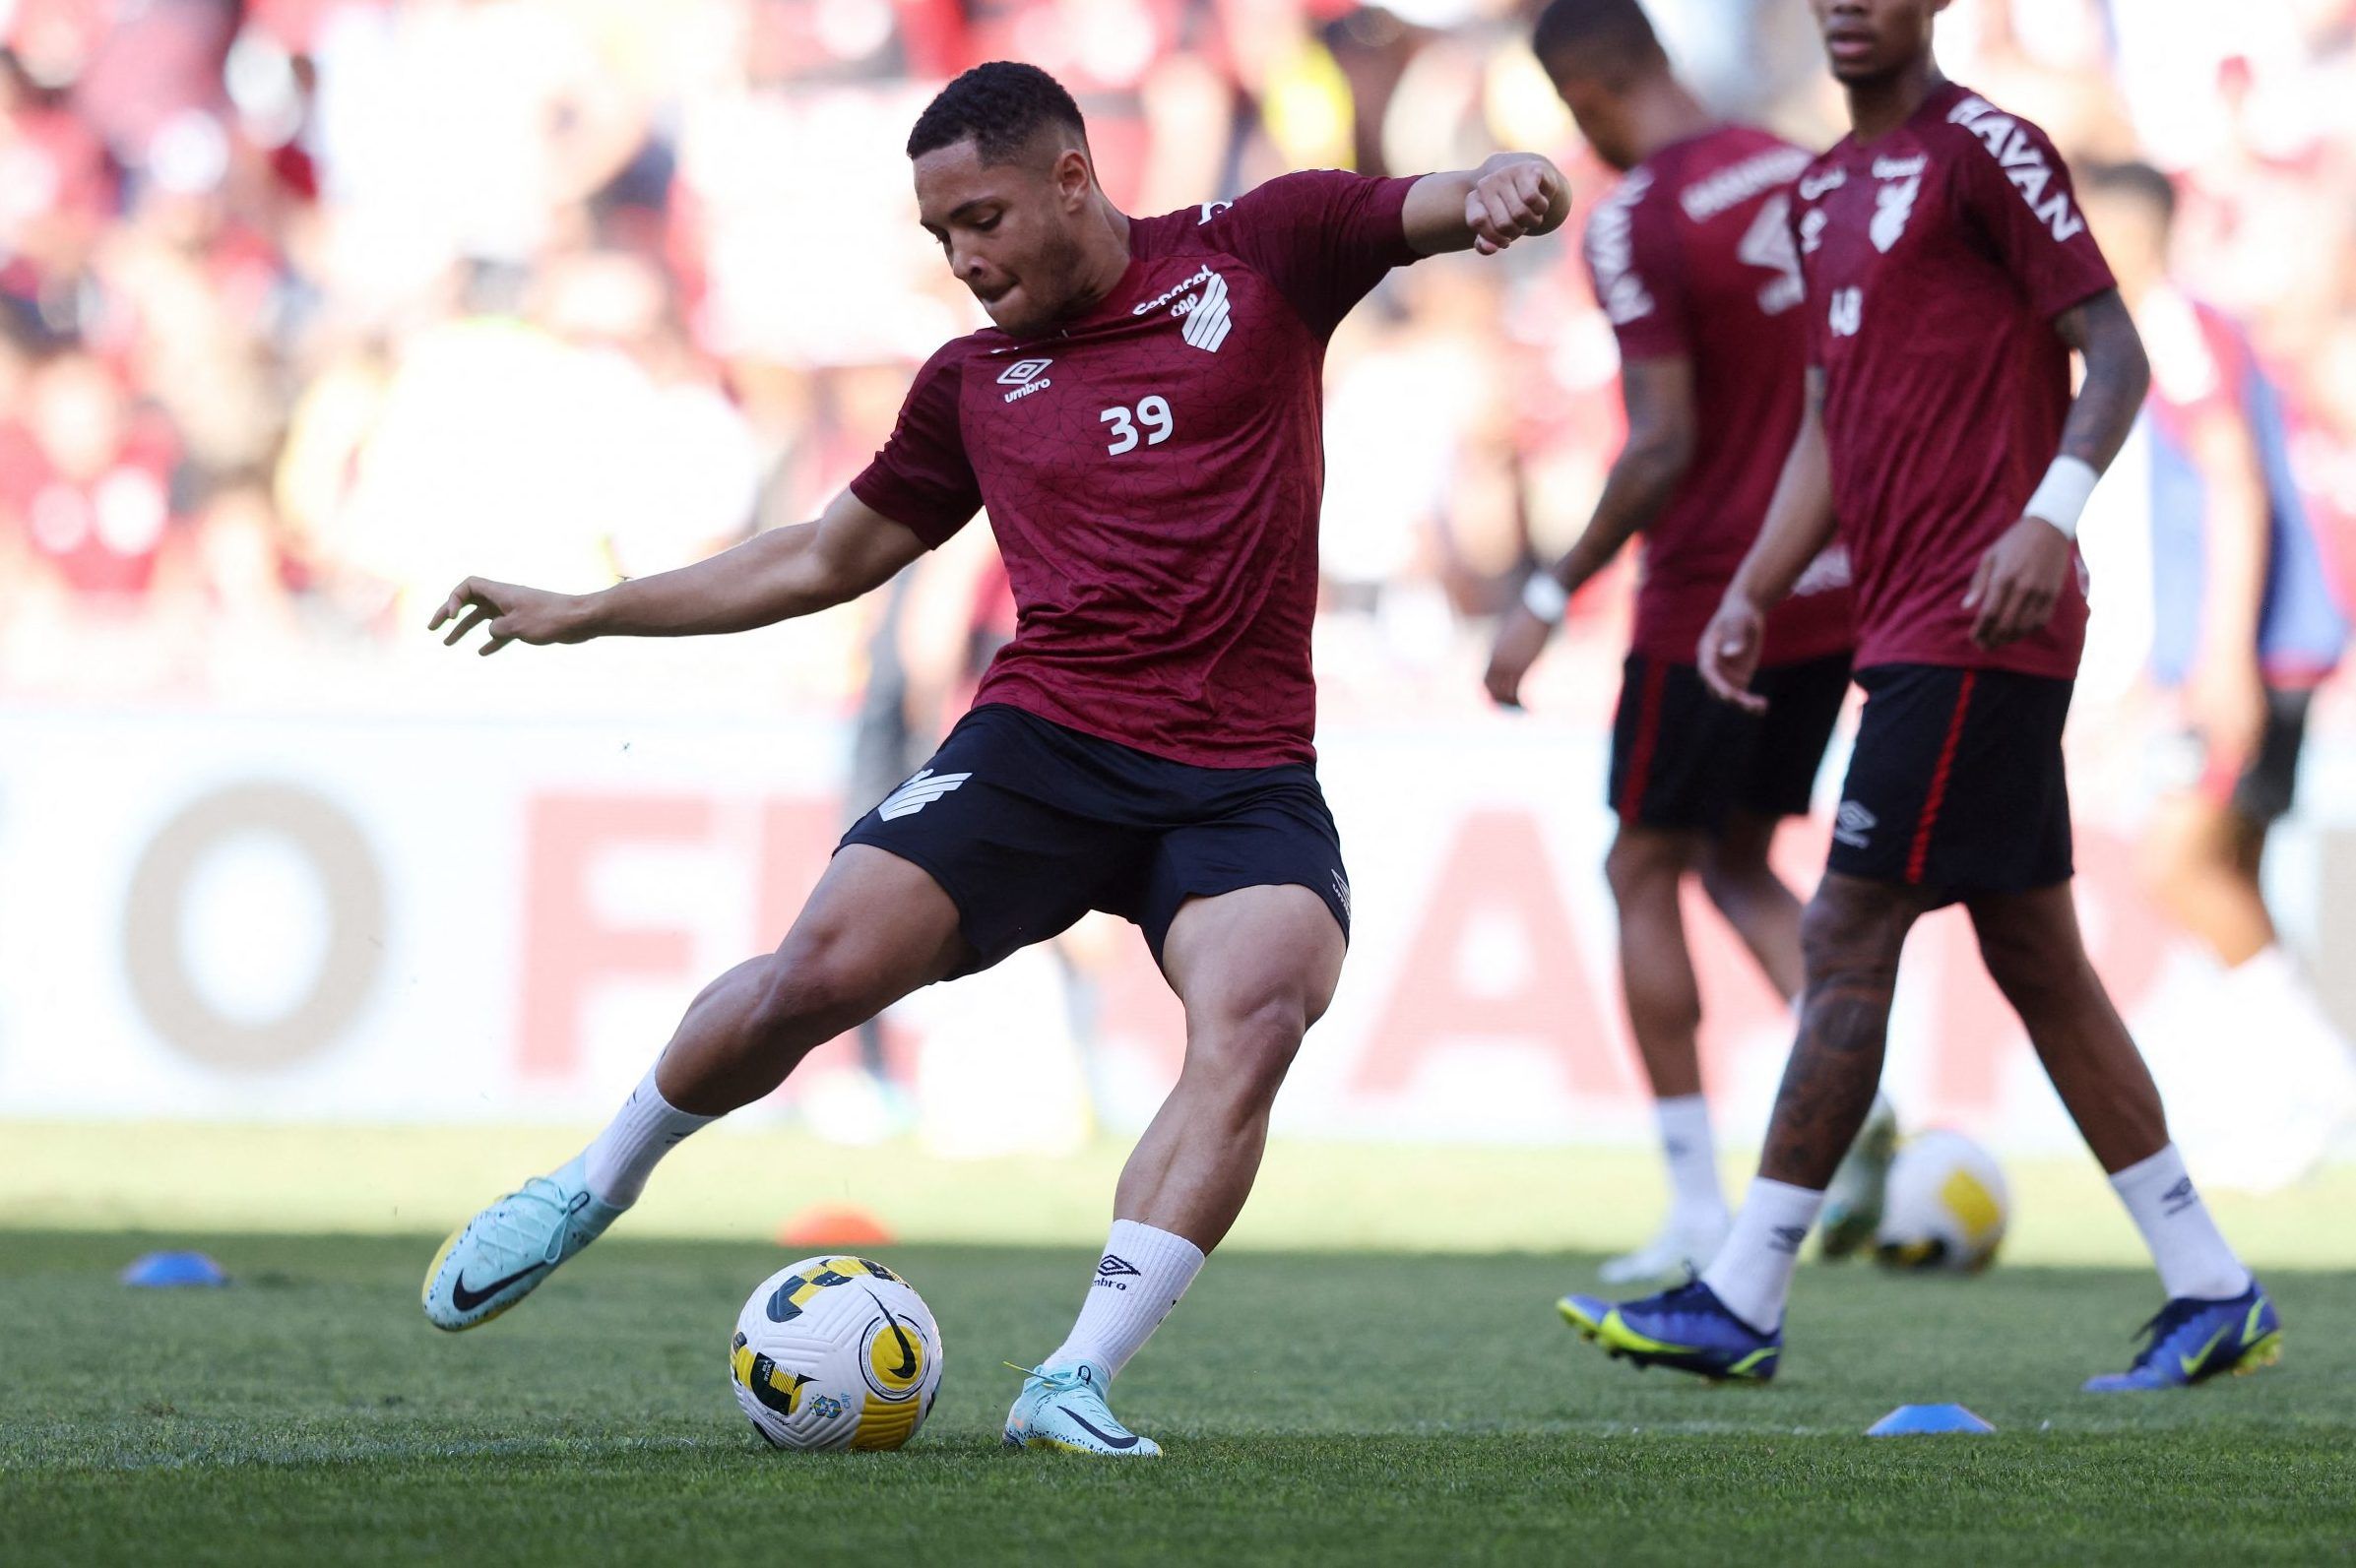 Atletico Paranaense's Vitor Roque during the warm up